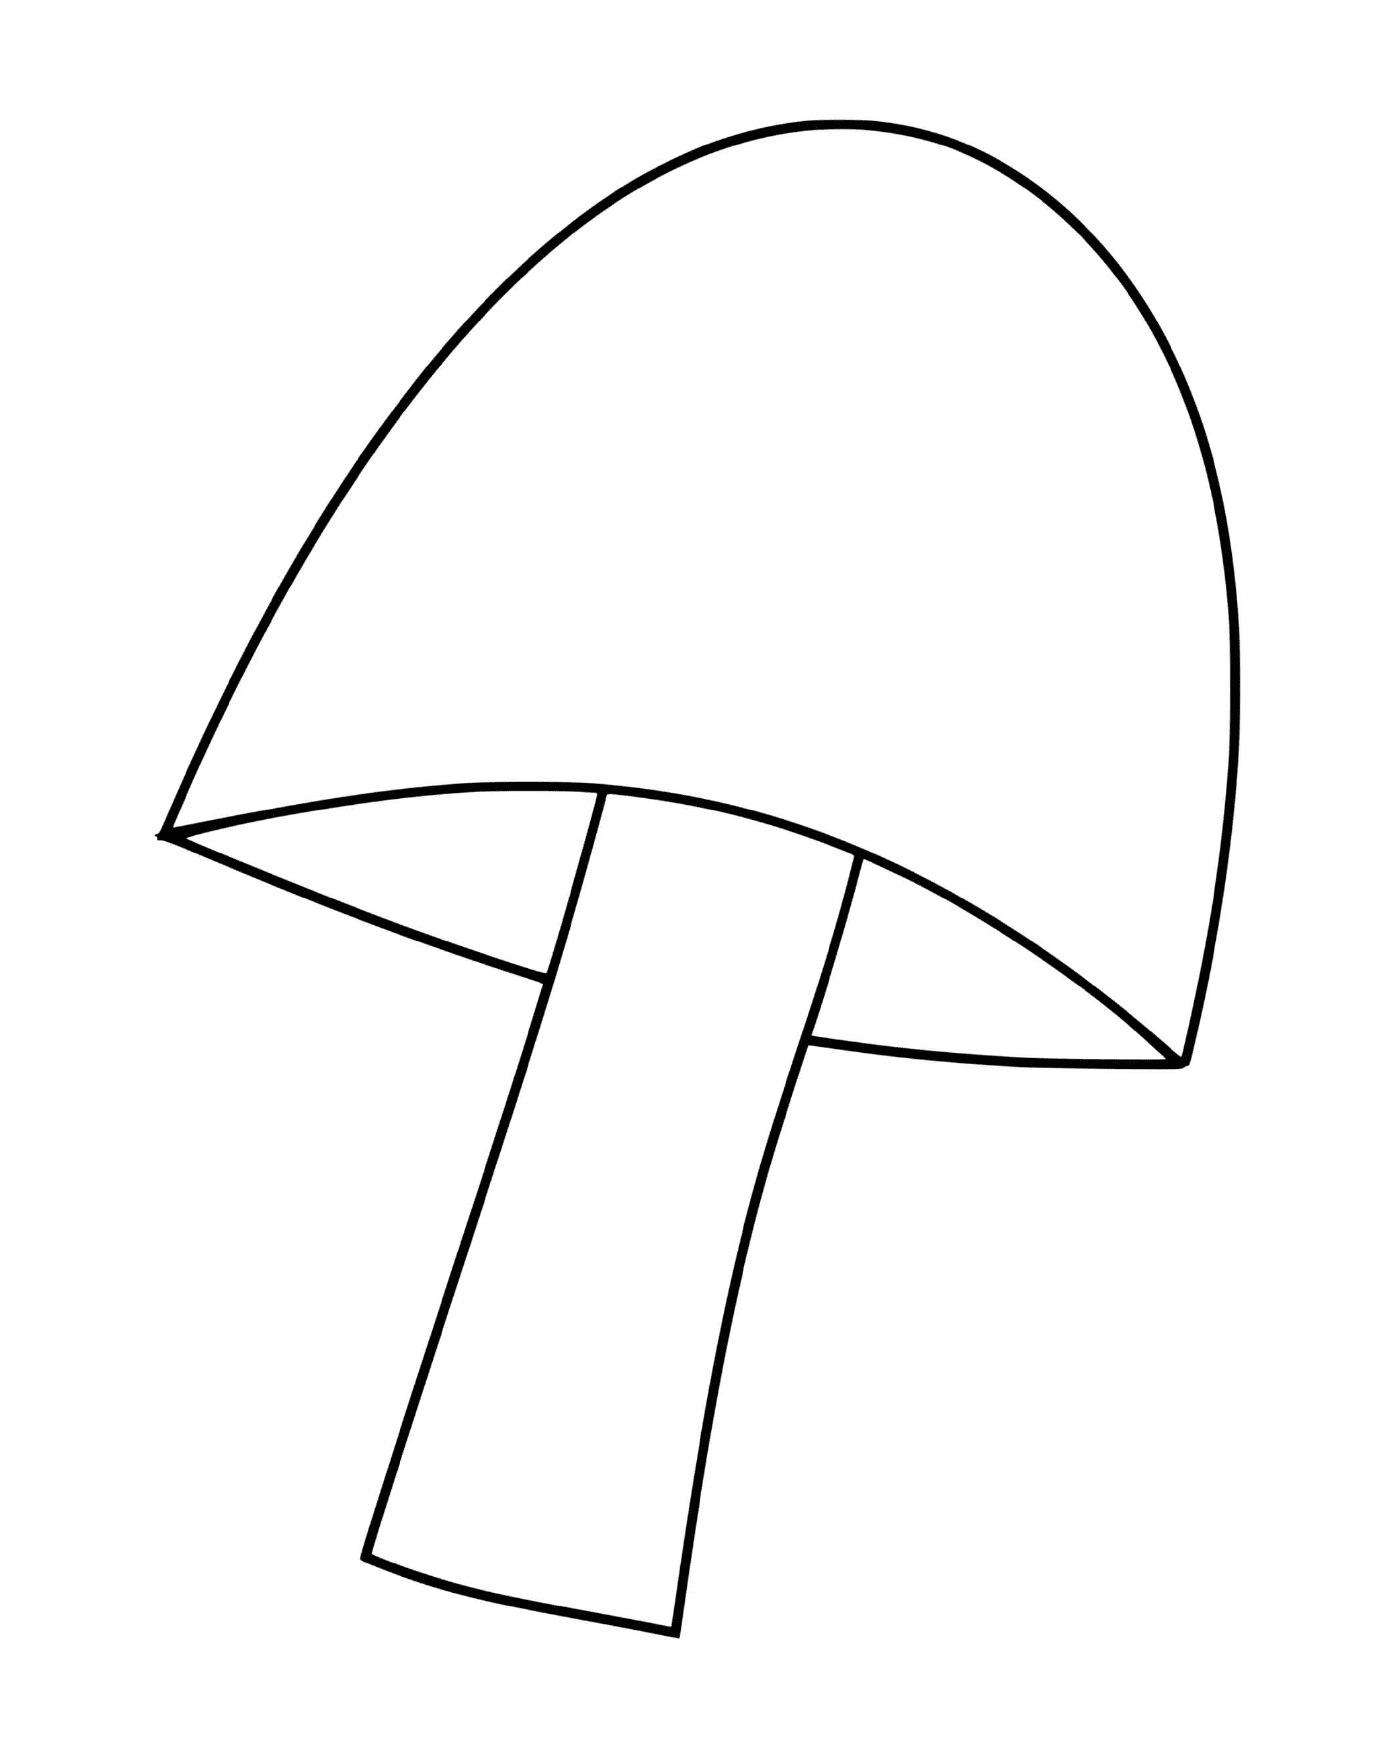  Simple contour of a fungus 